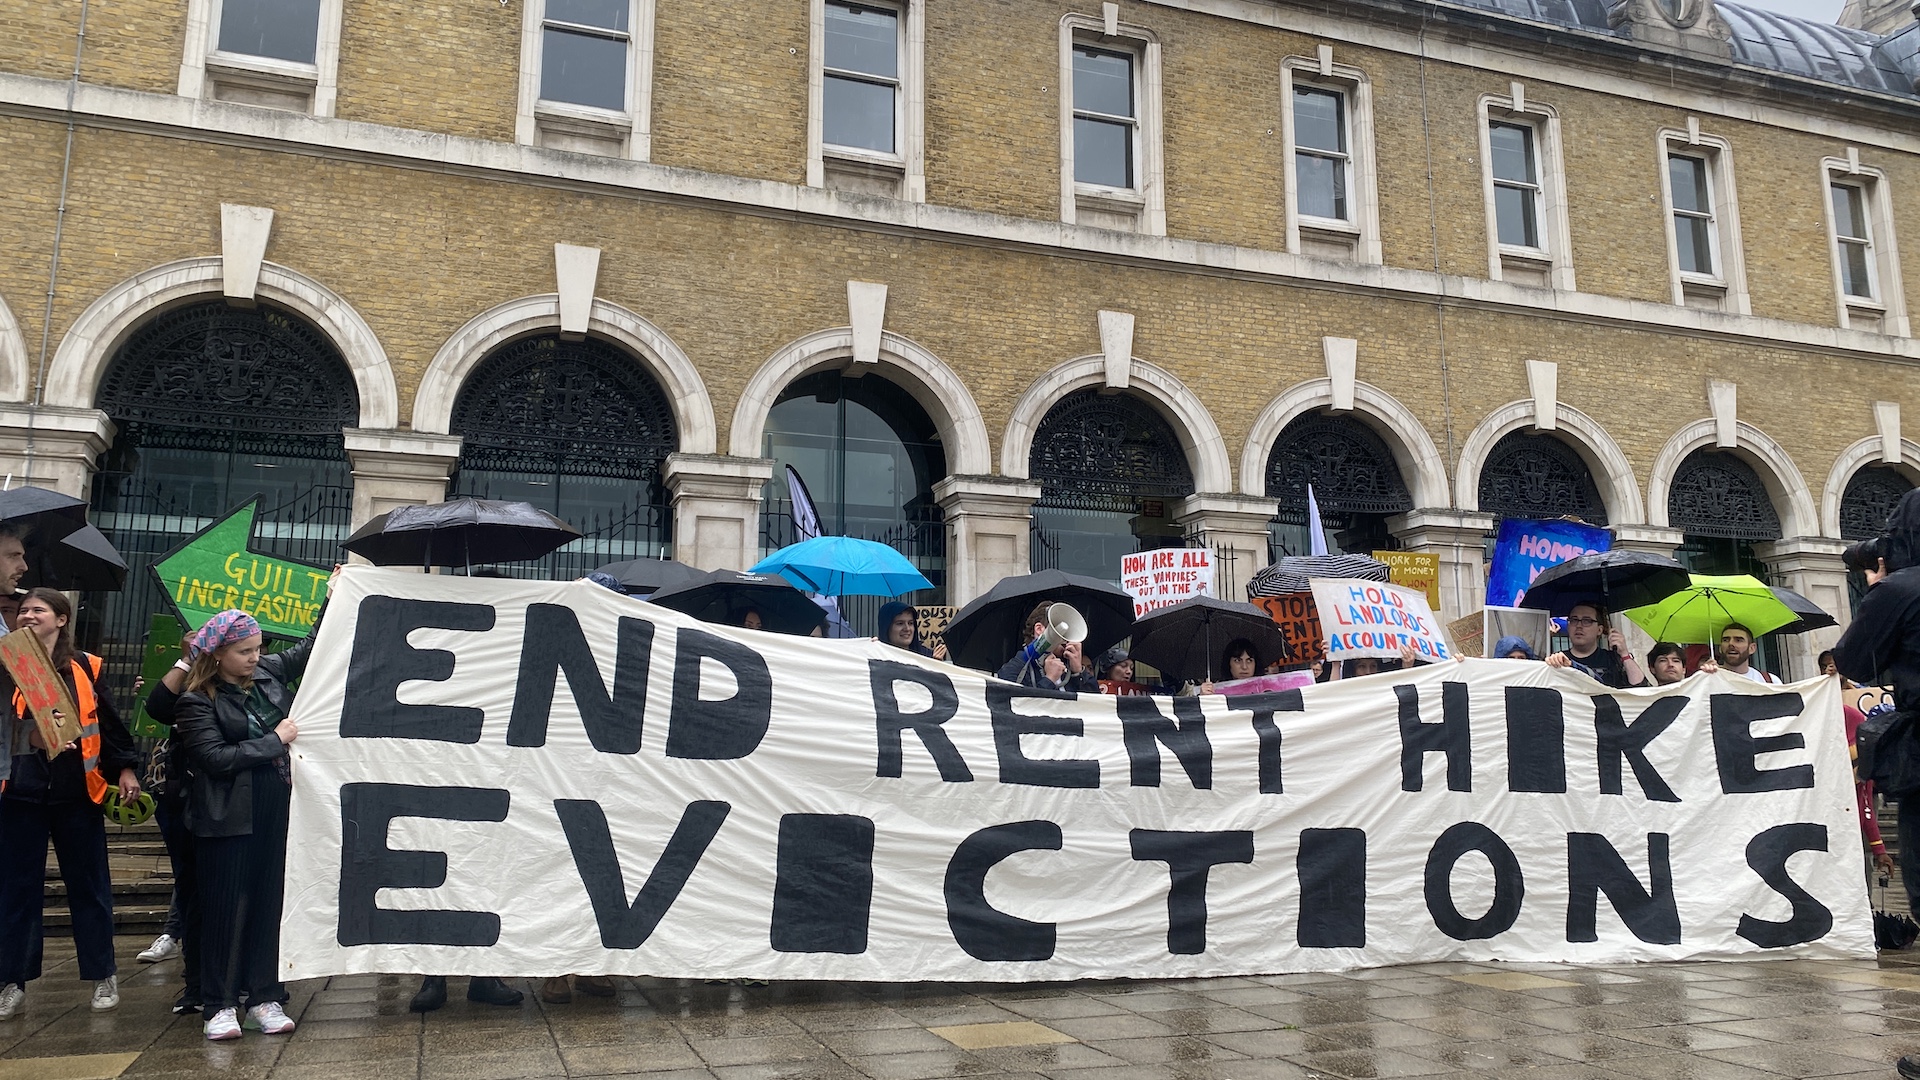 Protesters hold a banner which reads "end rent hike evictions"